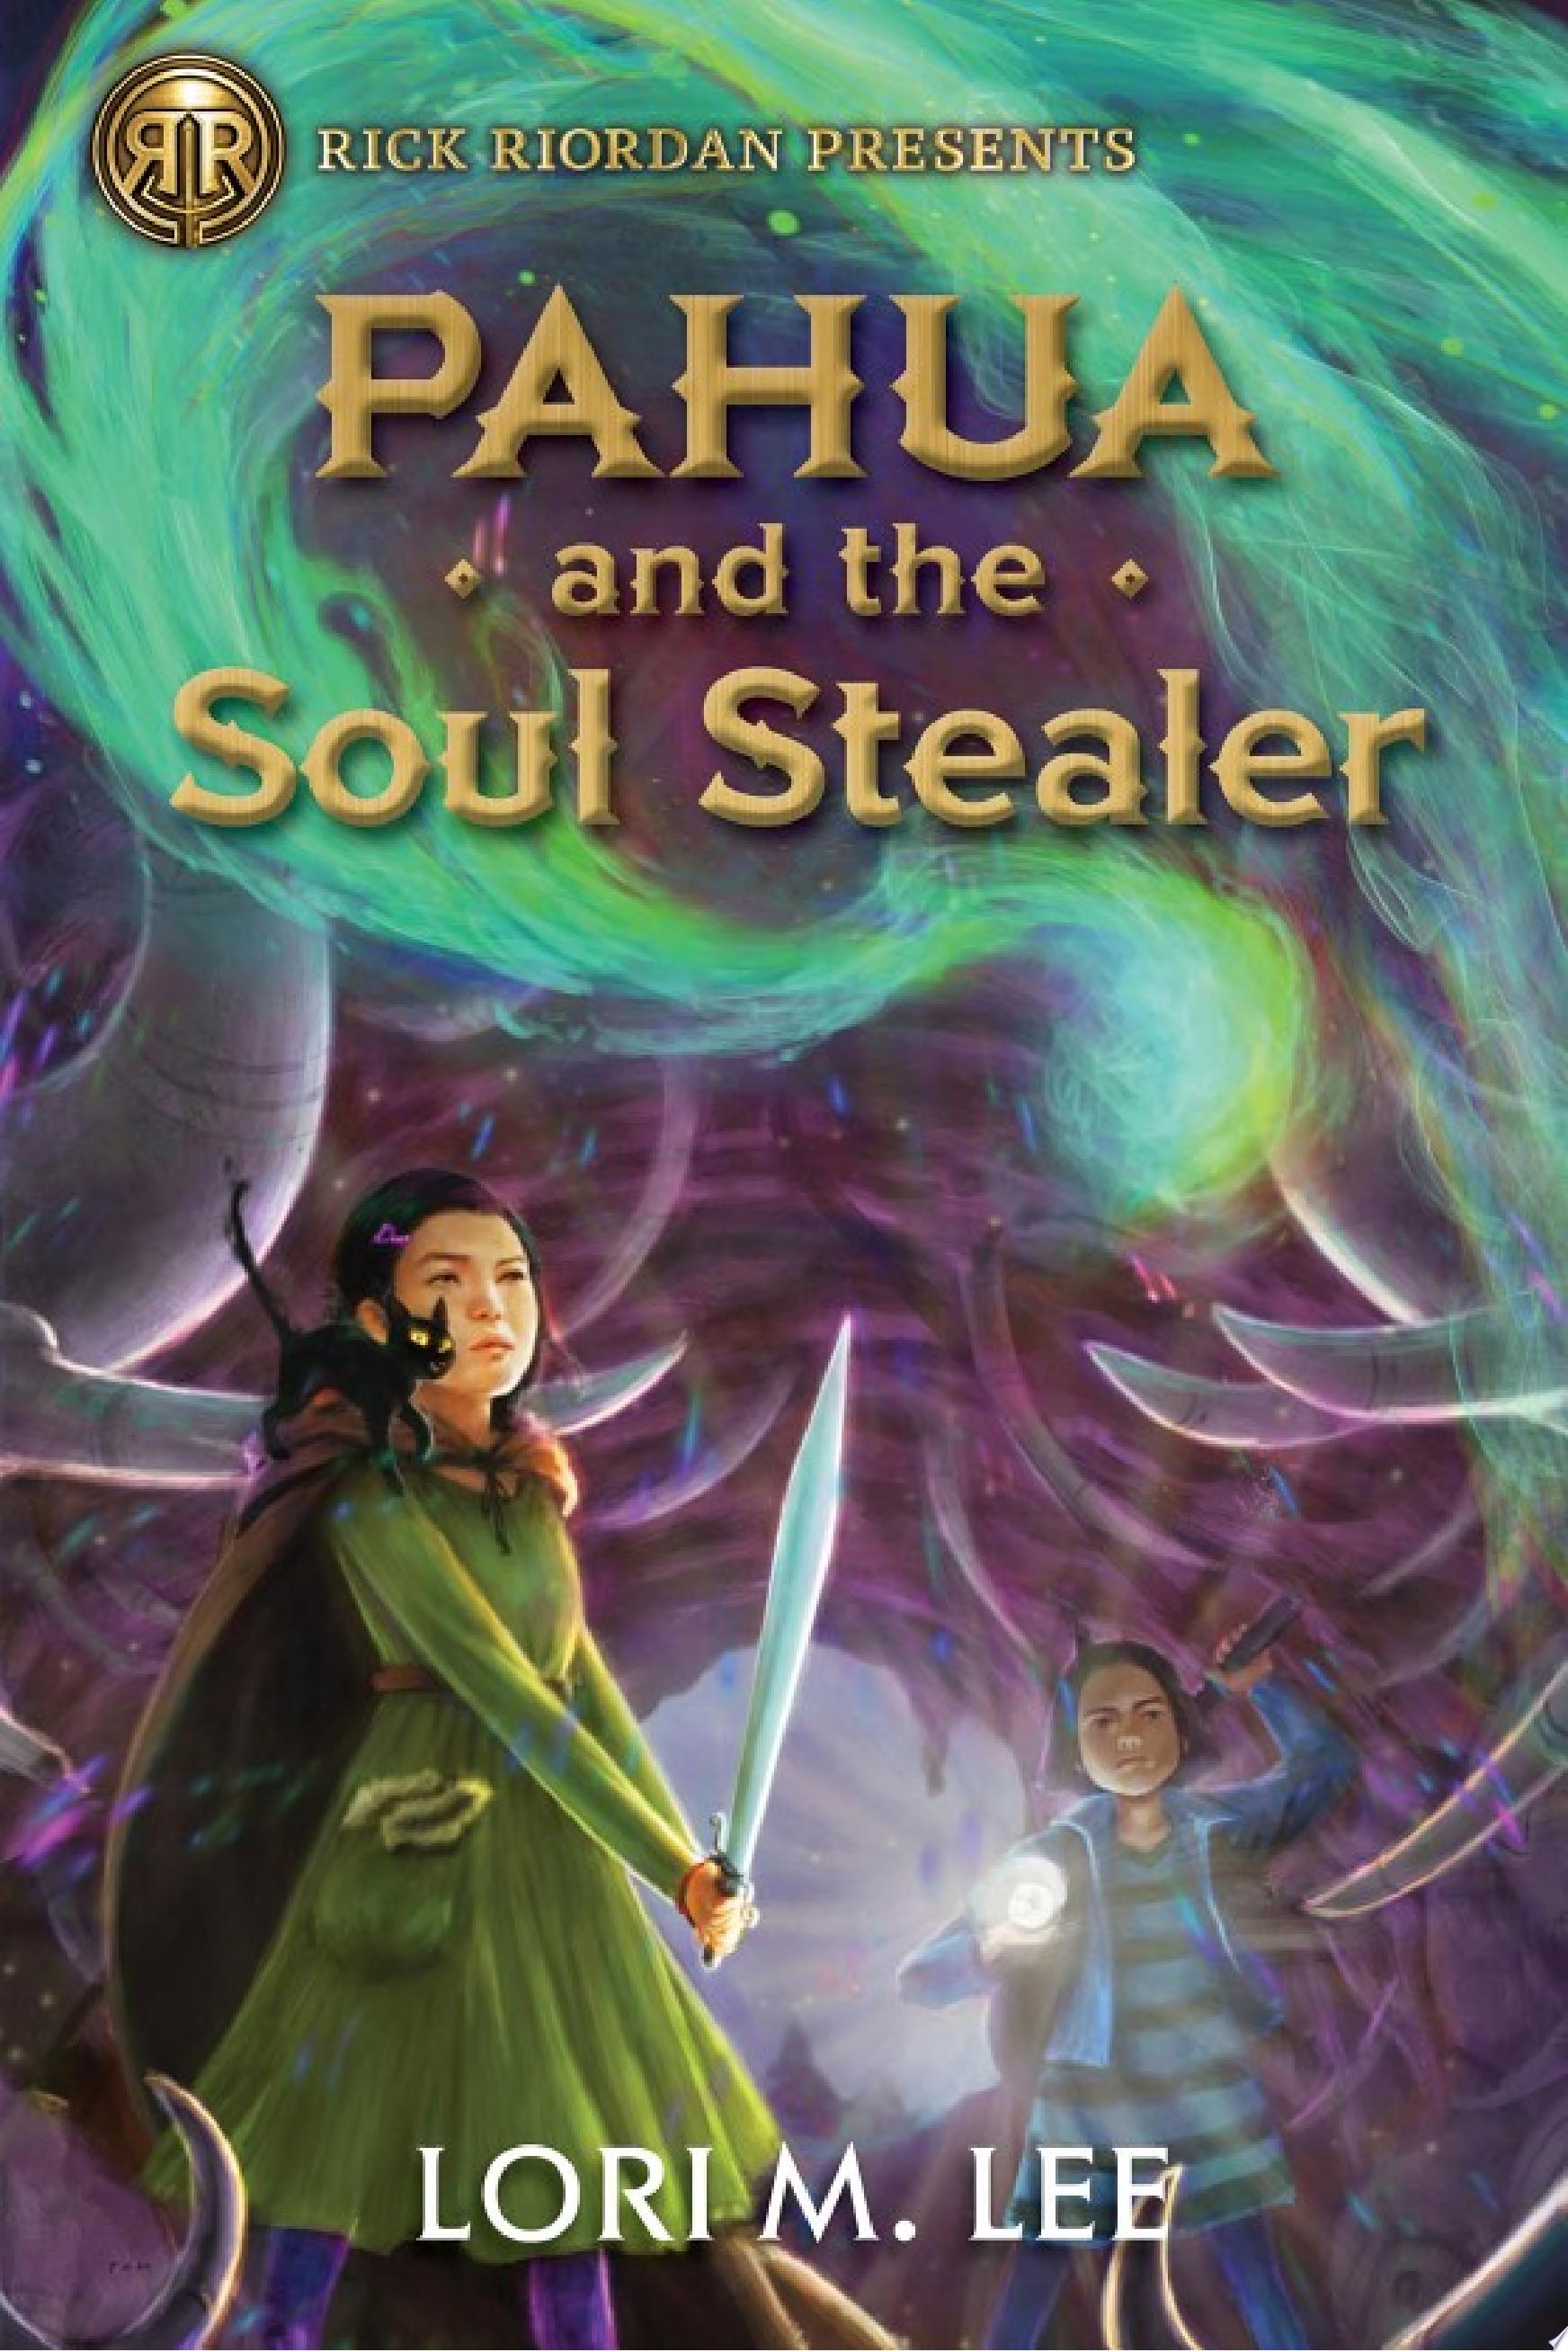 Image for "Pahua and the Soul Stealer"